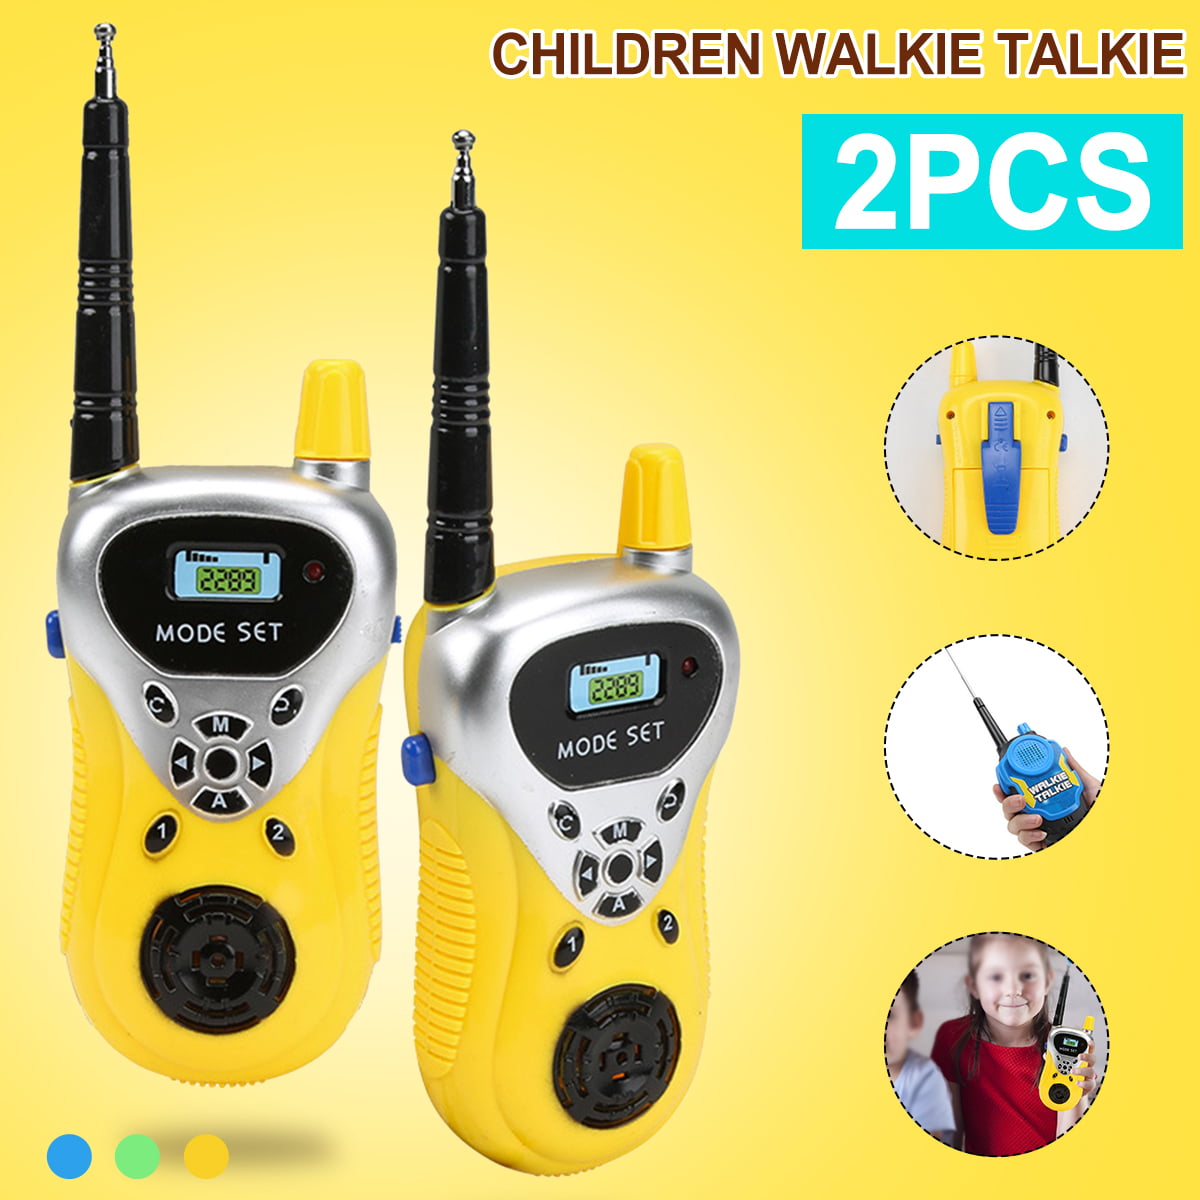 2 x Walkie Talkie Electronic Portable Tow-Way Radio Toy Set Great Gift For Kids 